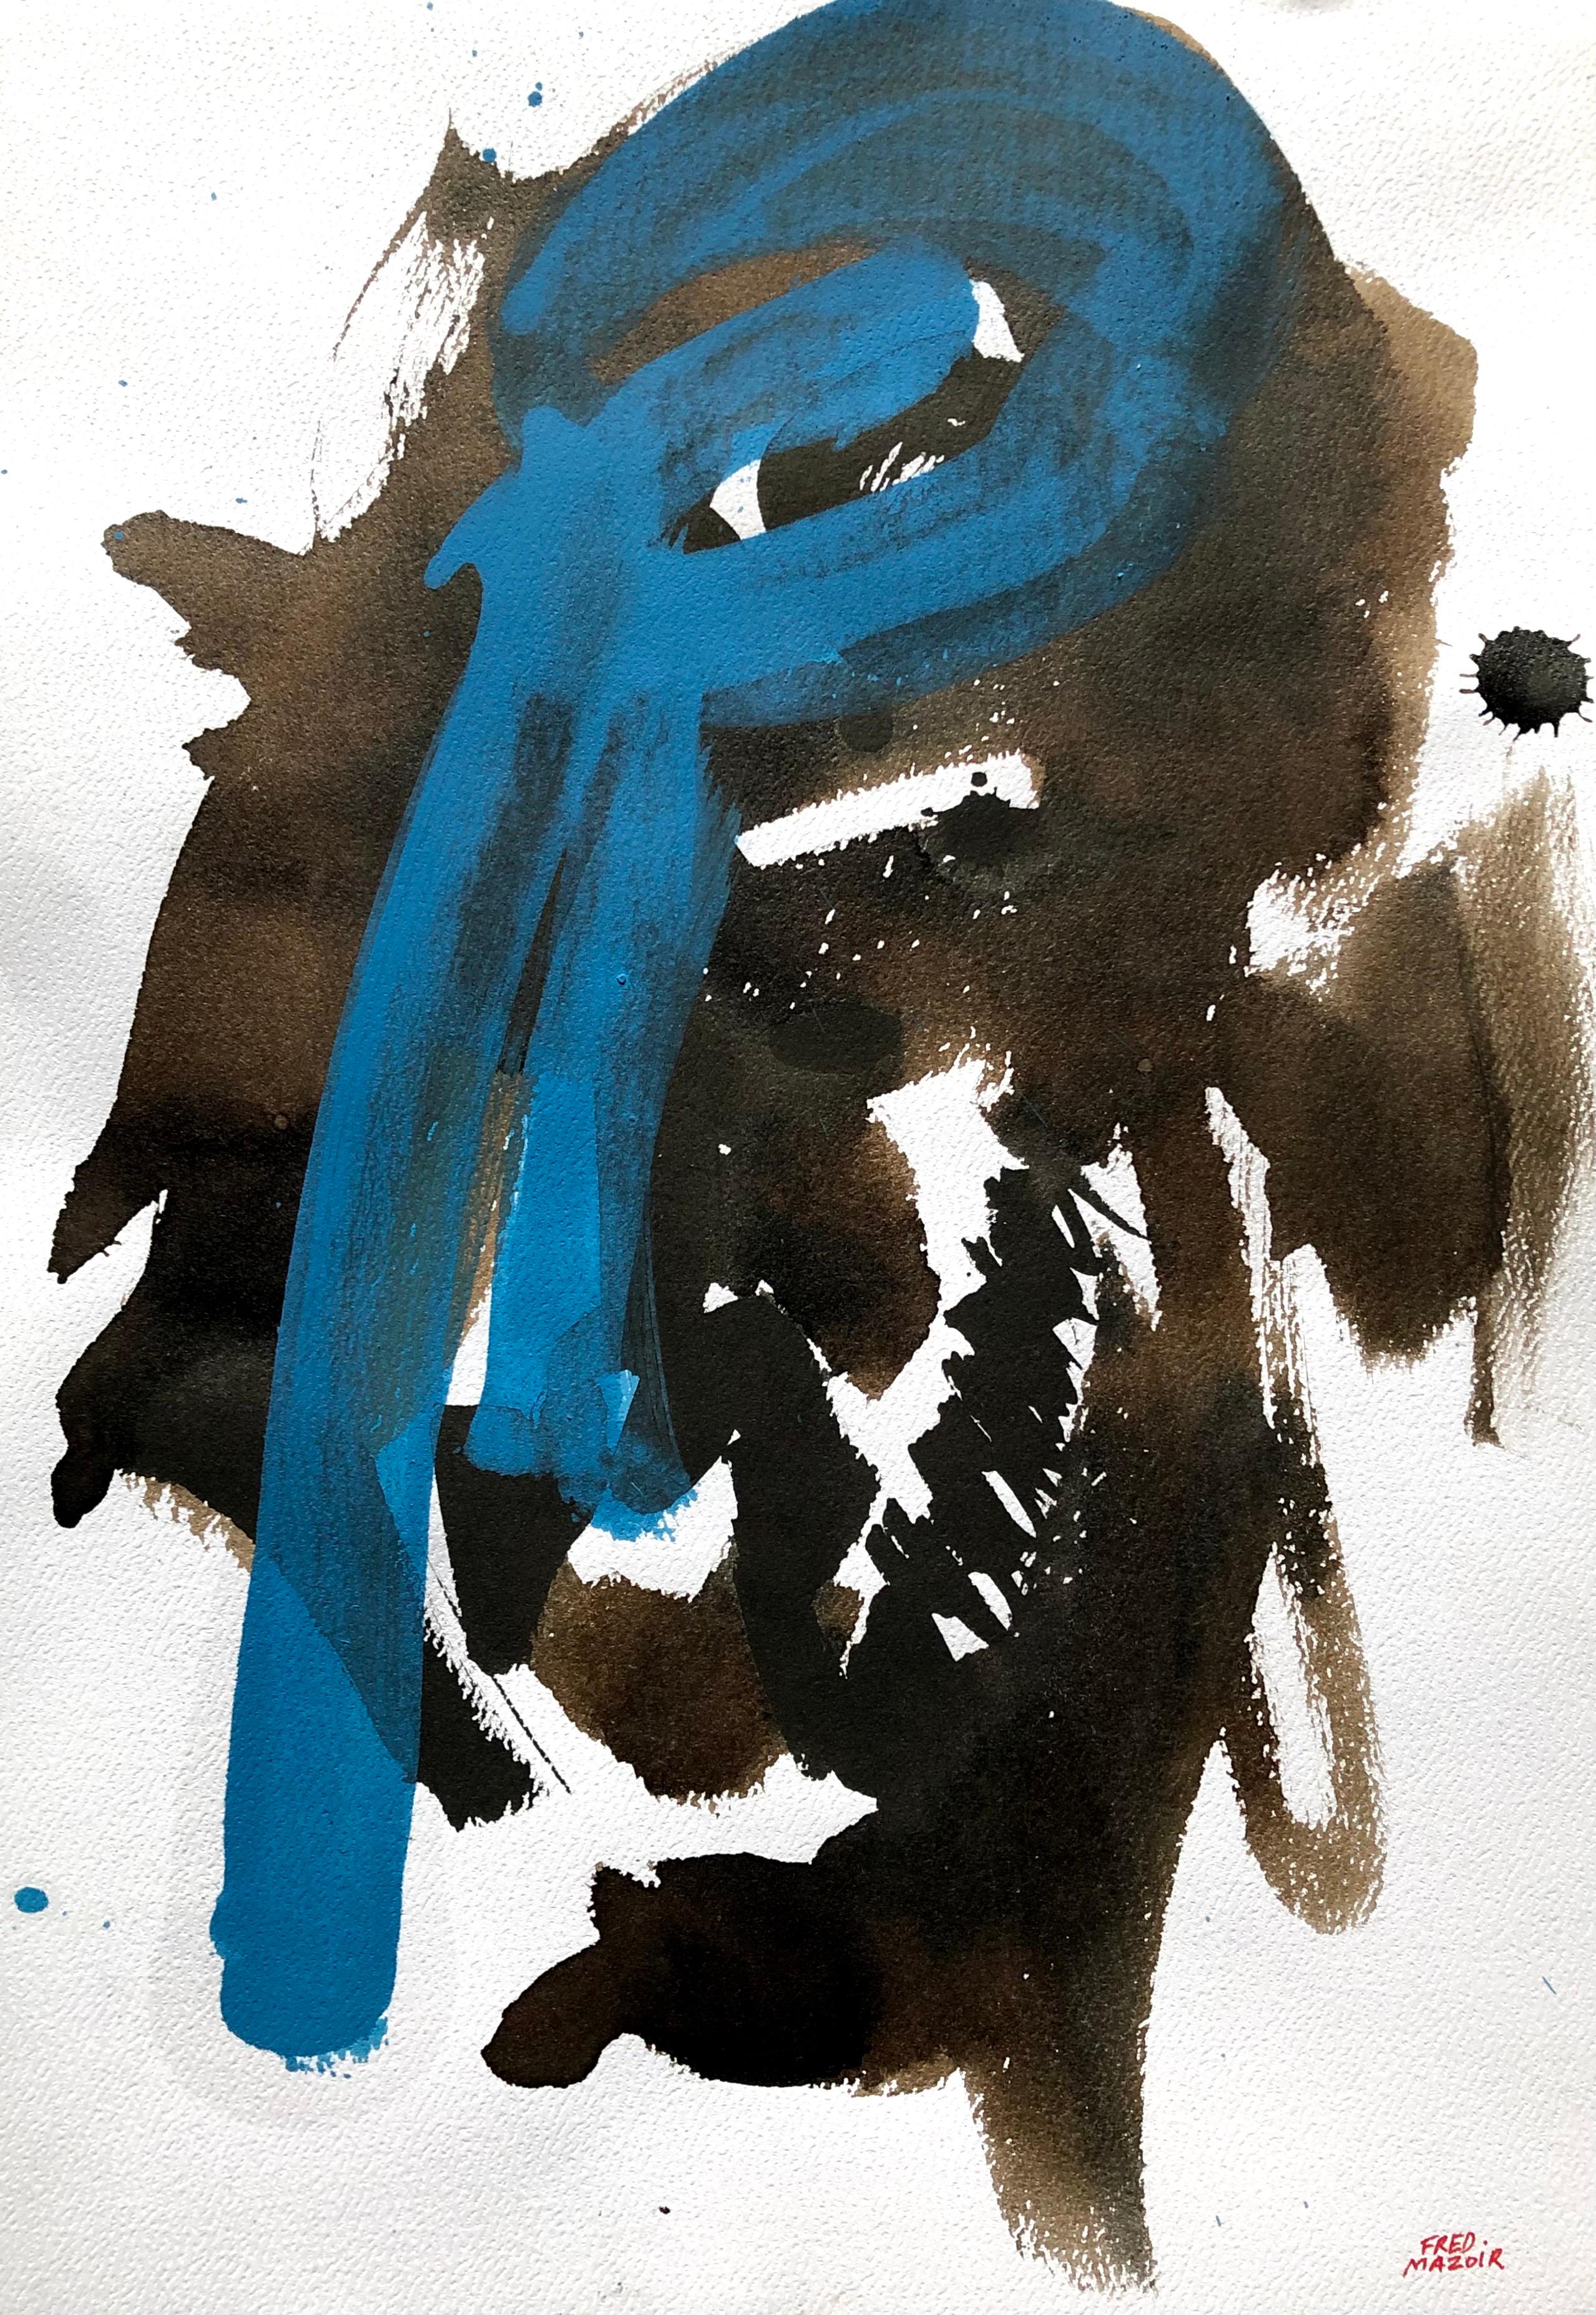 Indian ink, carbon black, walnut husk, gouaches & blue oil on AMT paper